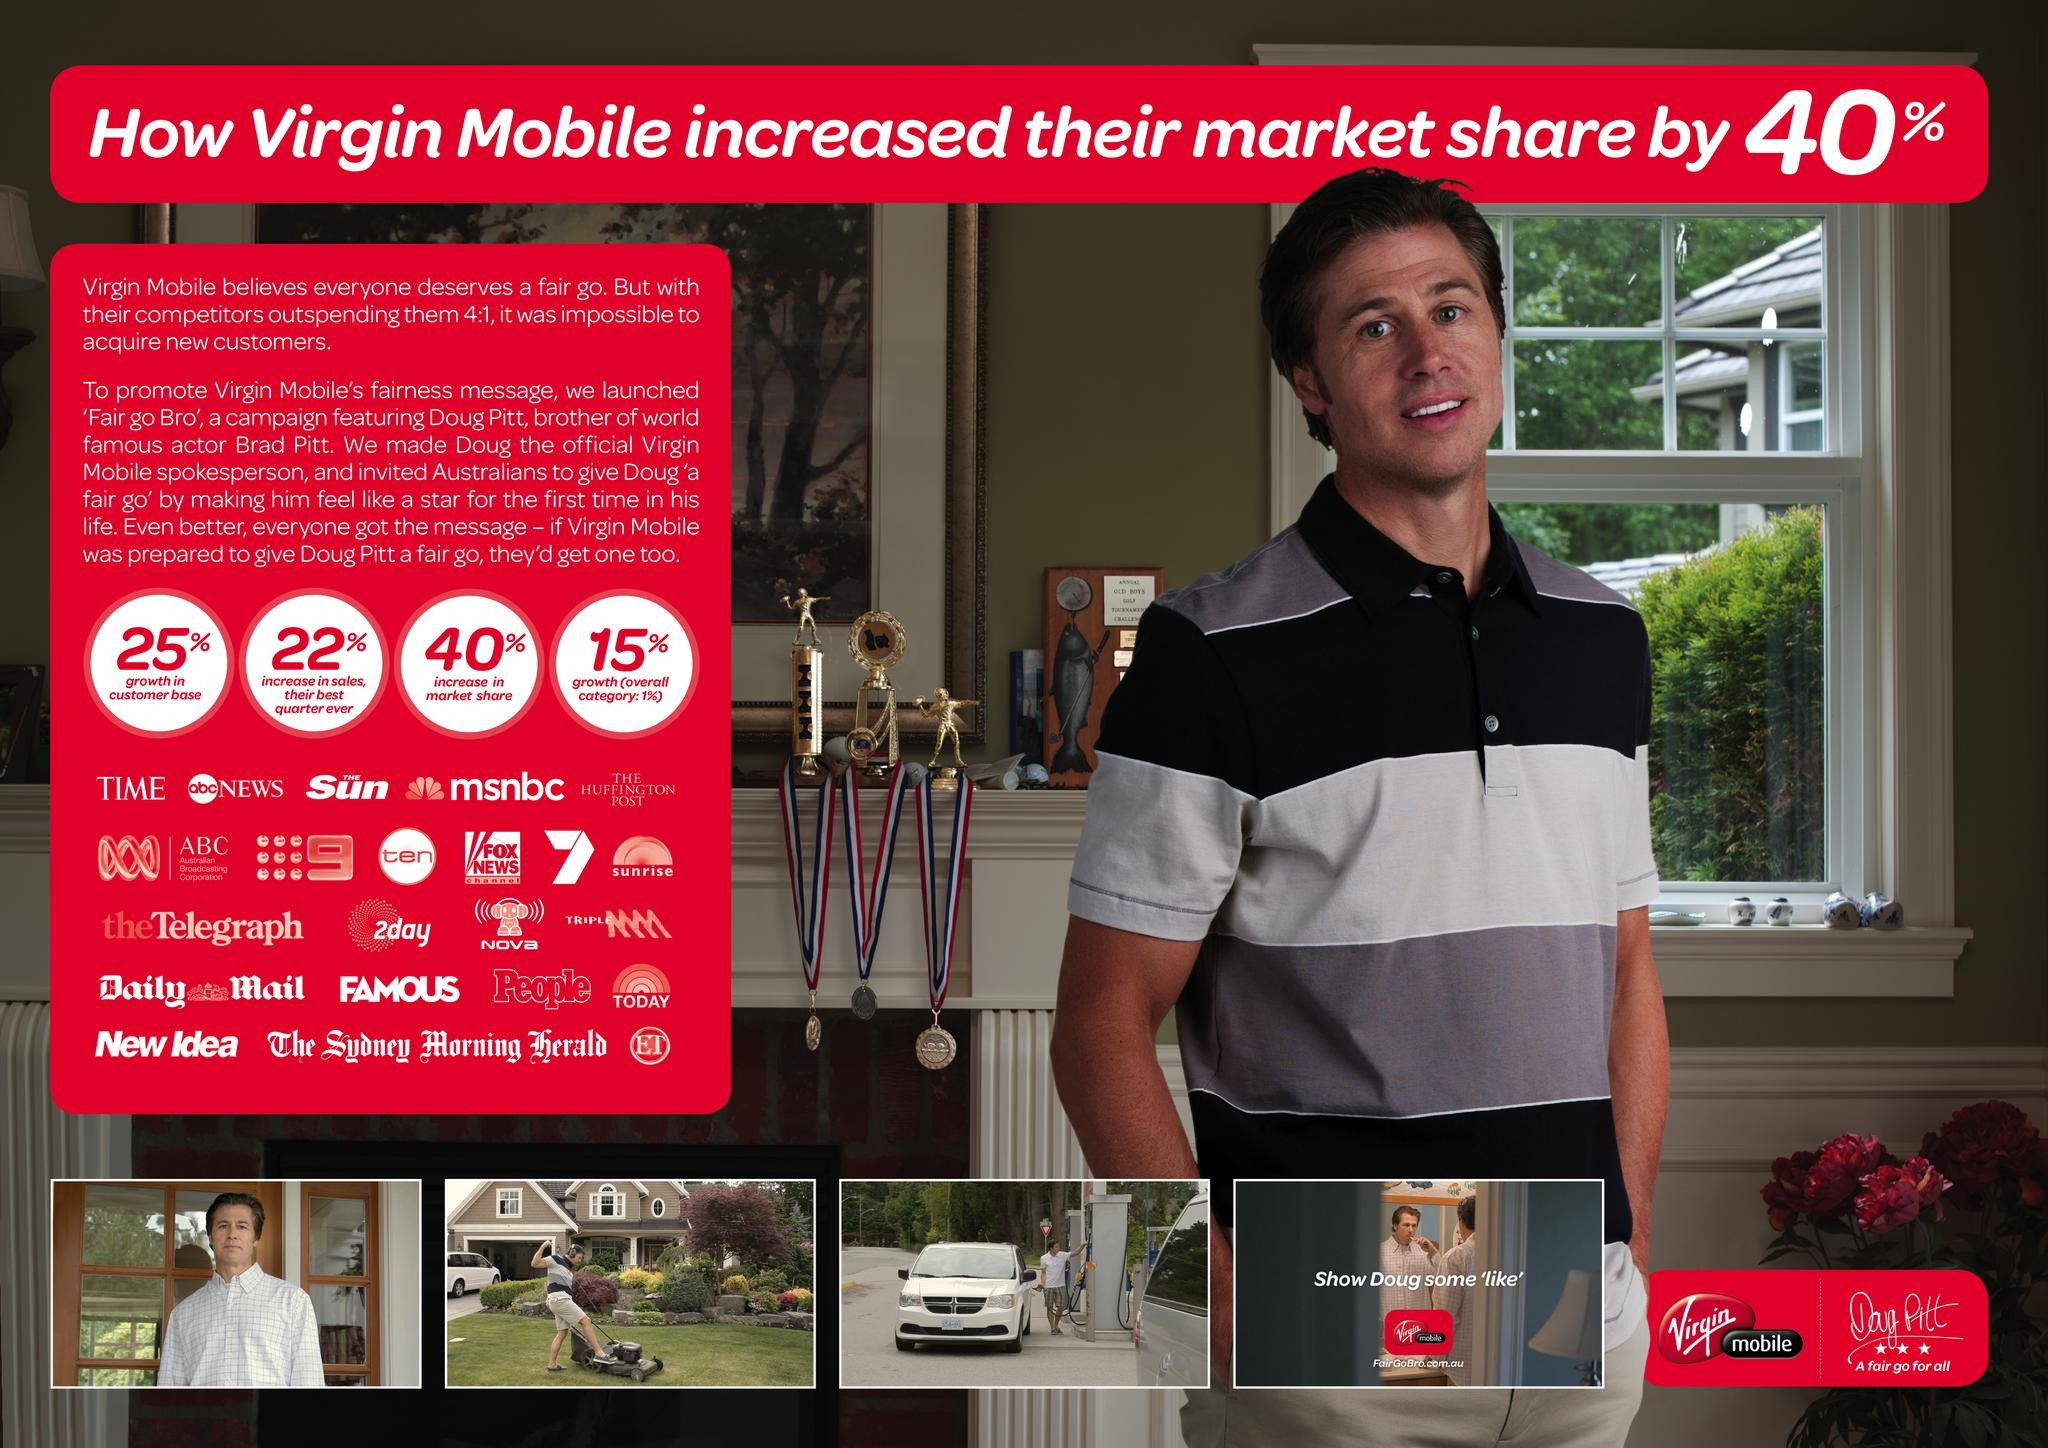 HOW BRAD PITT'S BRO' HELPED VIRGIN MOBILE PUNCH ABOVE ITS WEIGHT